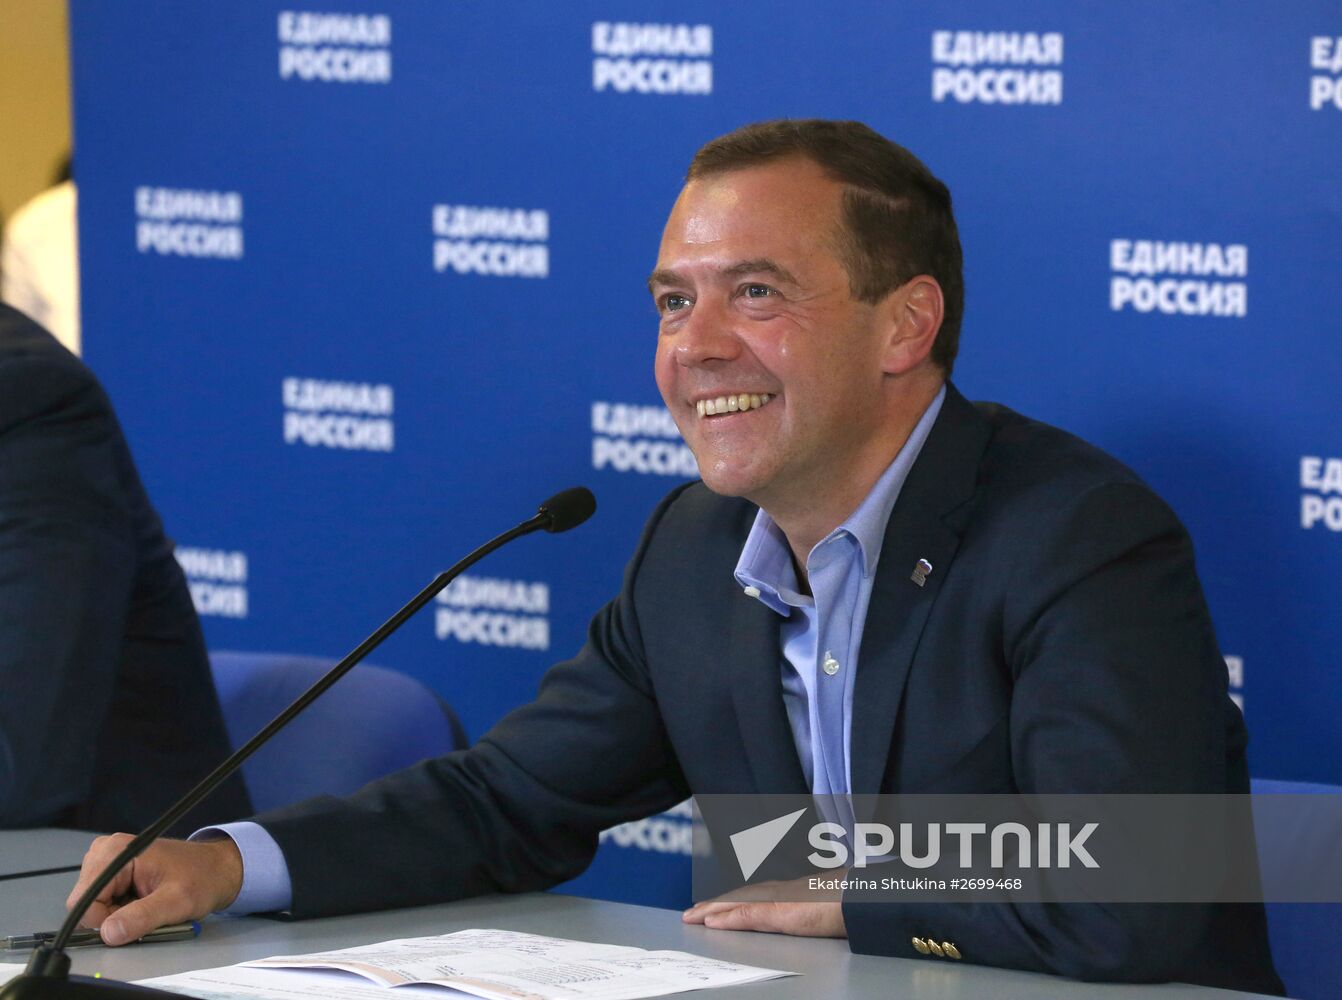 Dmitry Medvedev conducts videoconference with United Russia party representatives in Russian regions which held elections